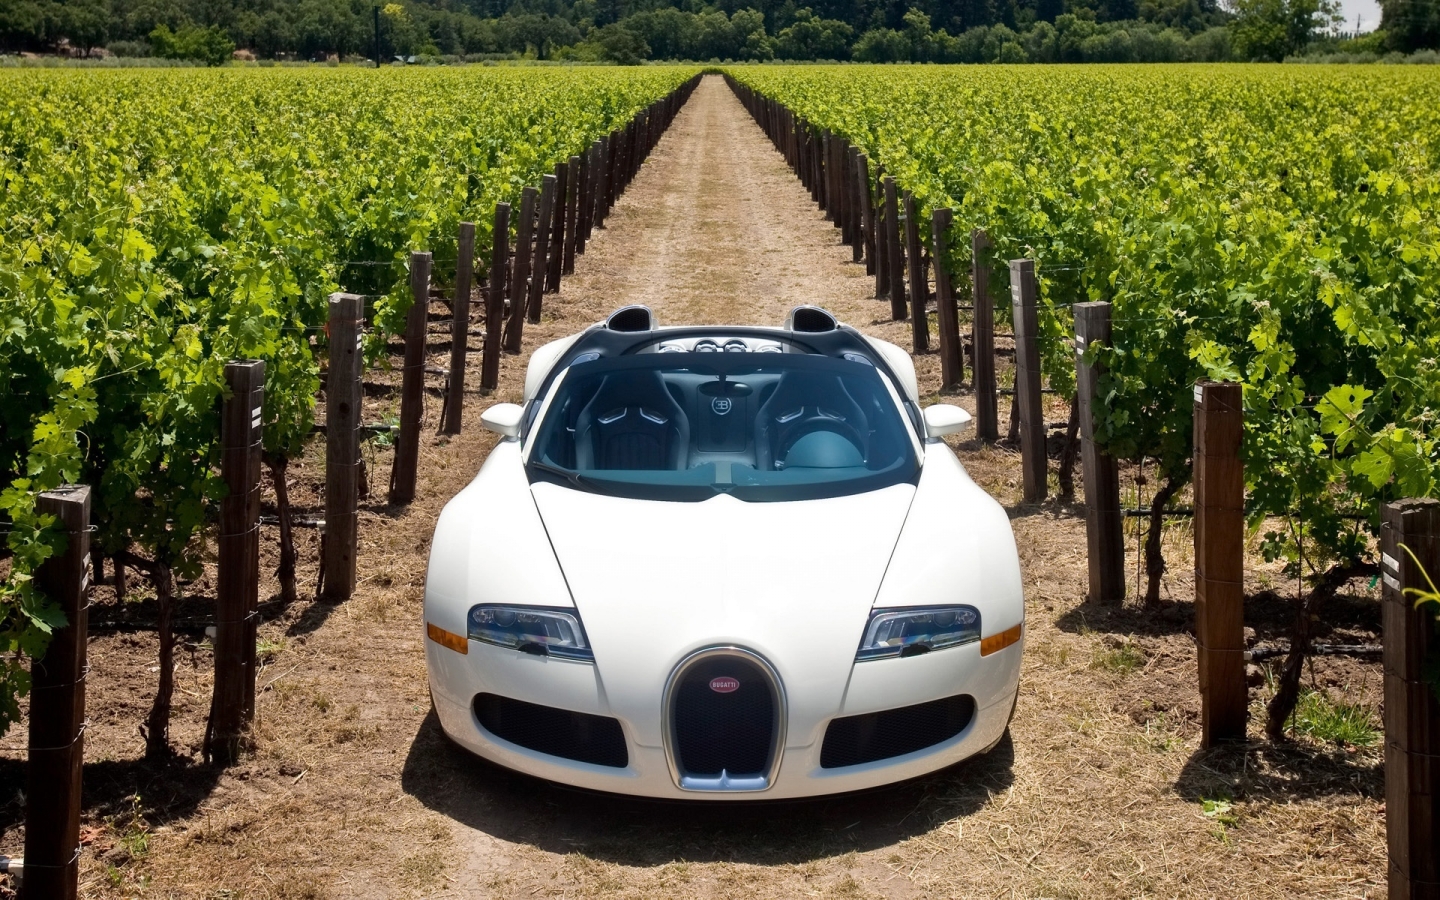 Bugatti Veyron 16.4 Grand Sport 2010 in Napa Valley - Front 2 for 1440 x 900 widescreen resolution